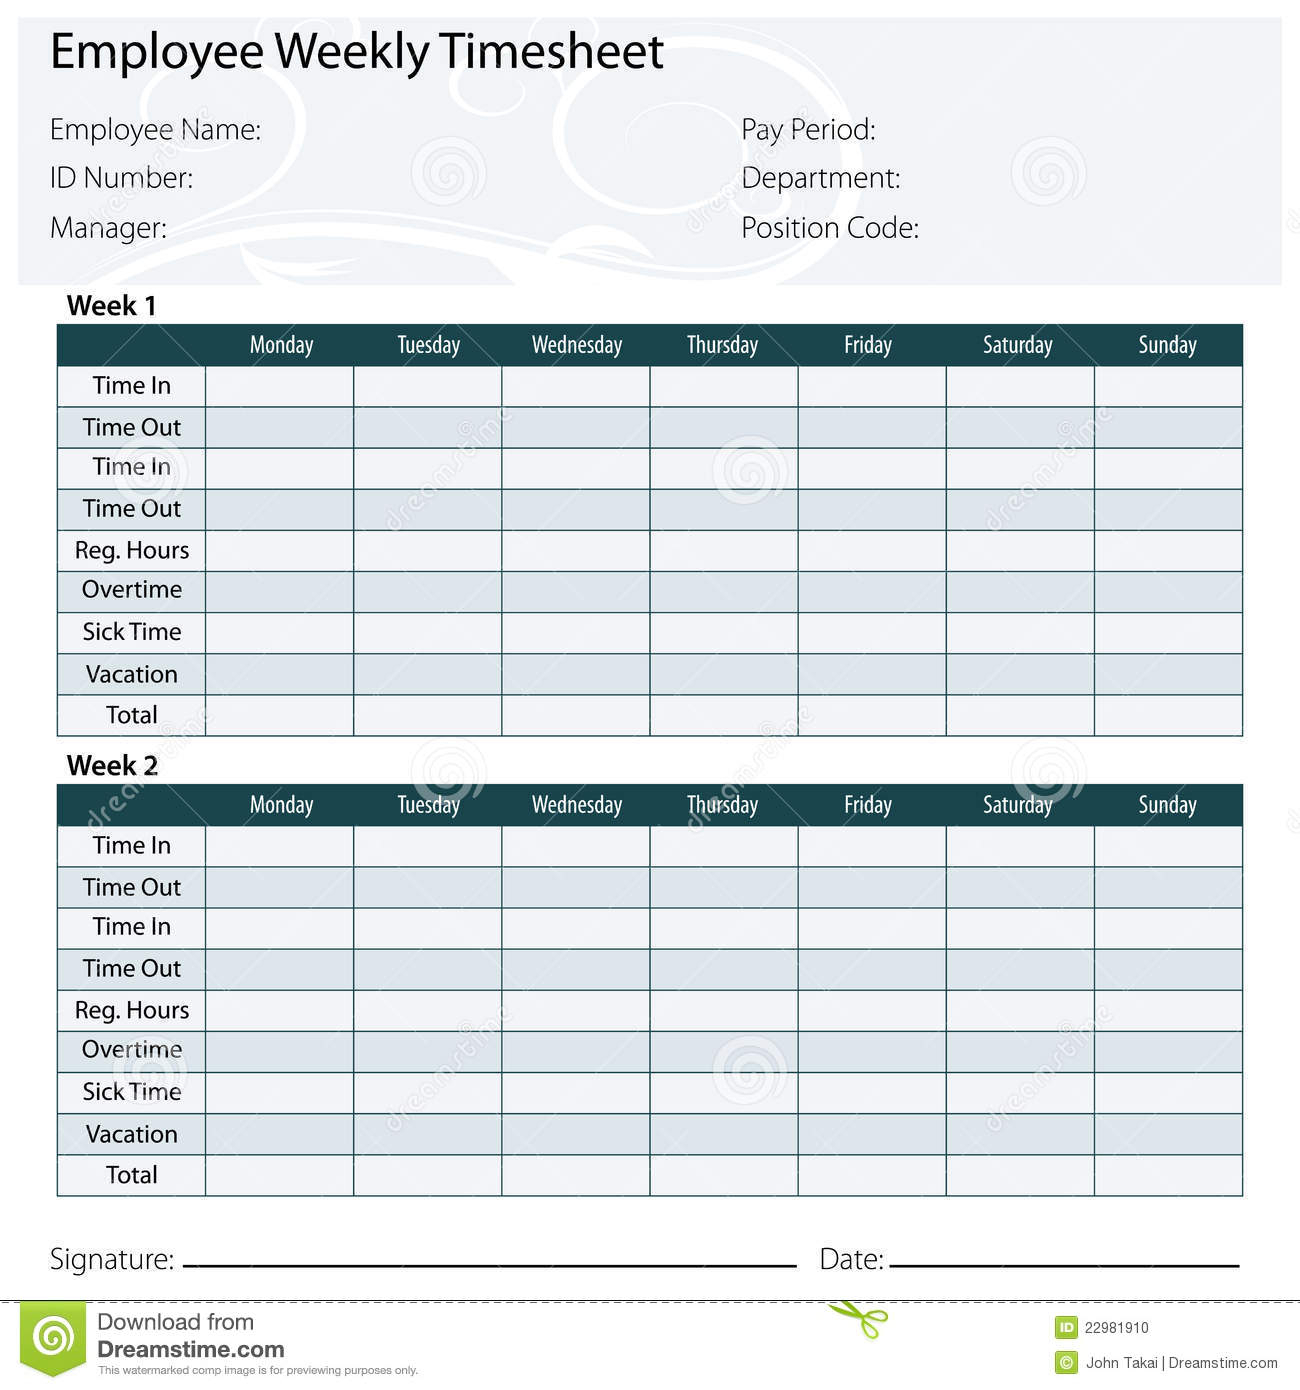 Time Tracking Spreadsheet Google Docs For Example Of Employee Time Tracking Spreadsheet Hours Excel